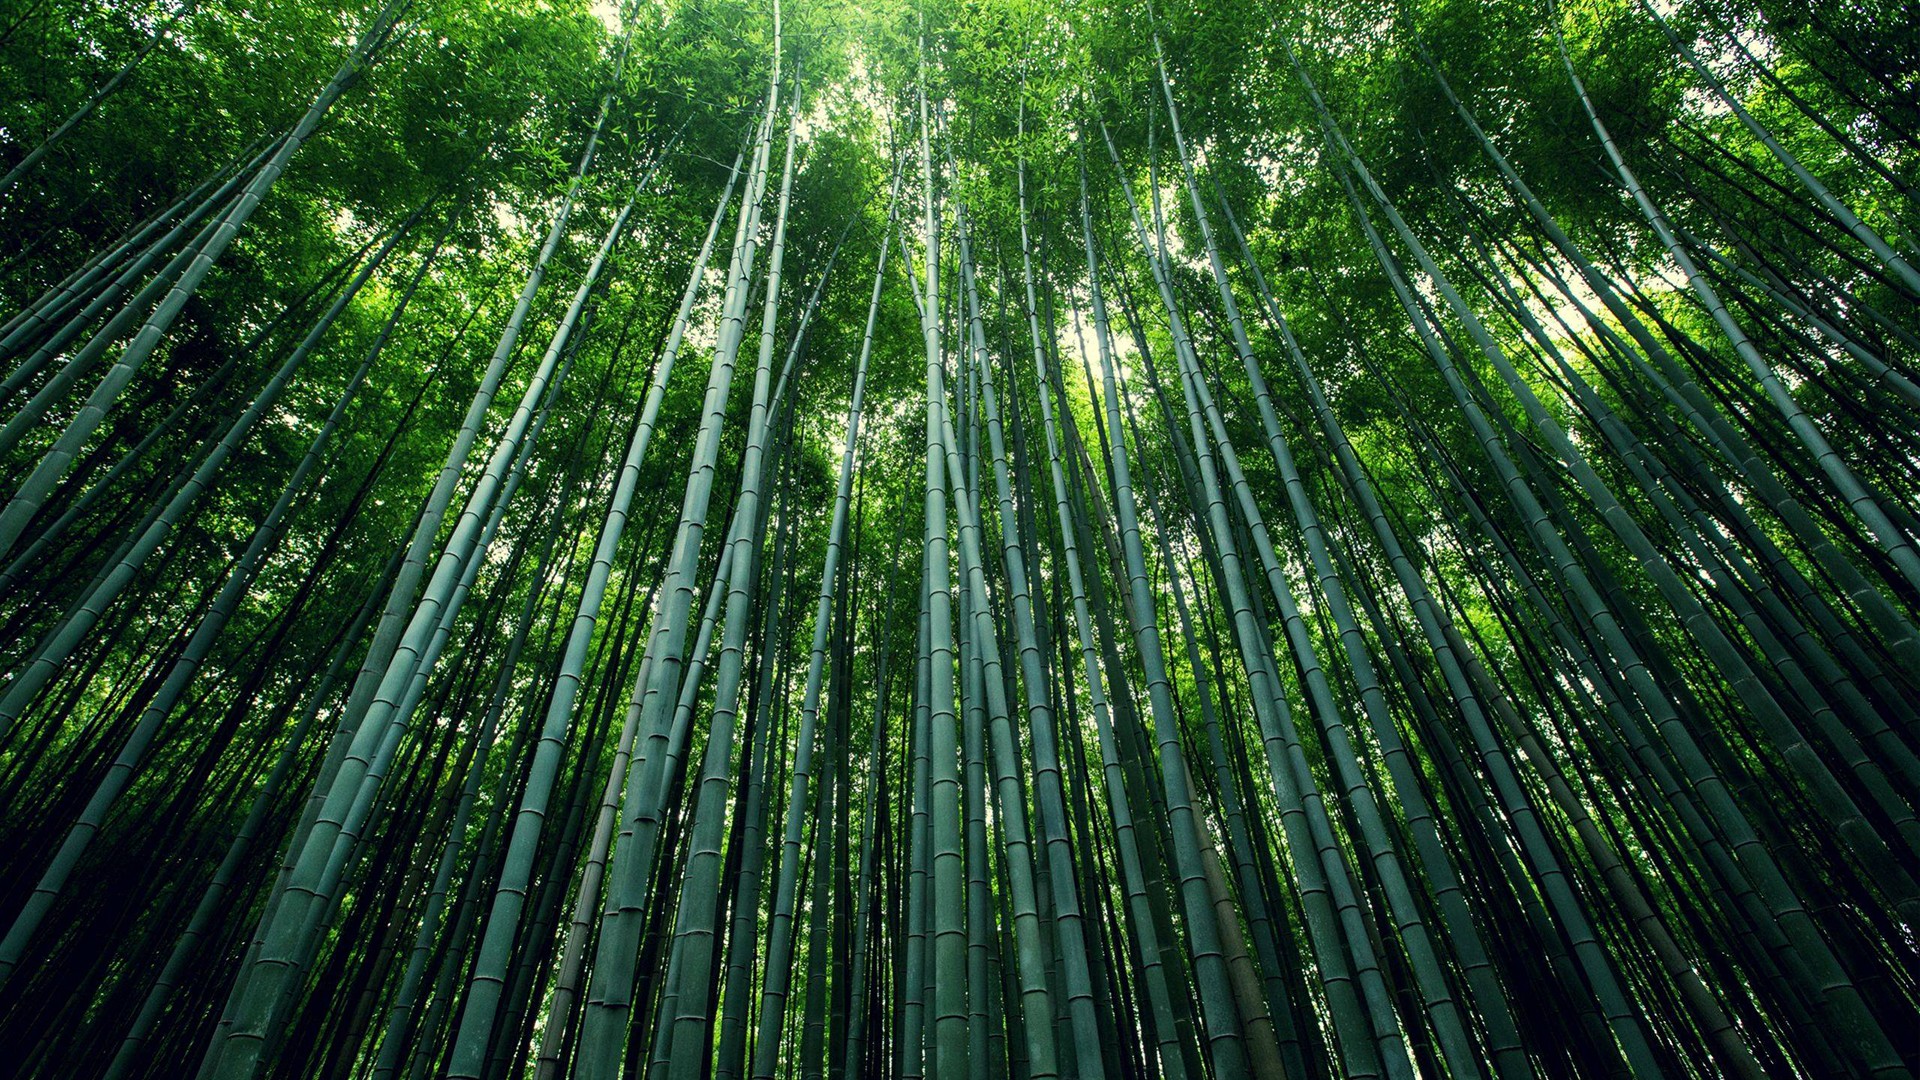 Bamboo Picture